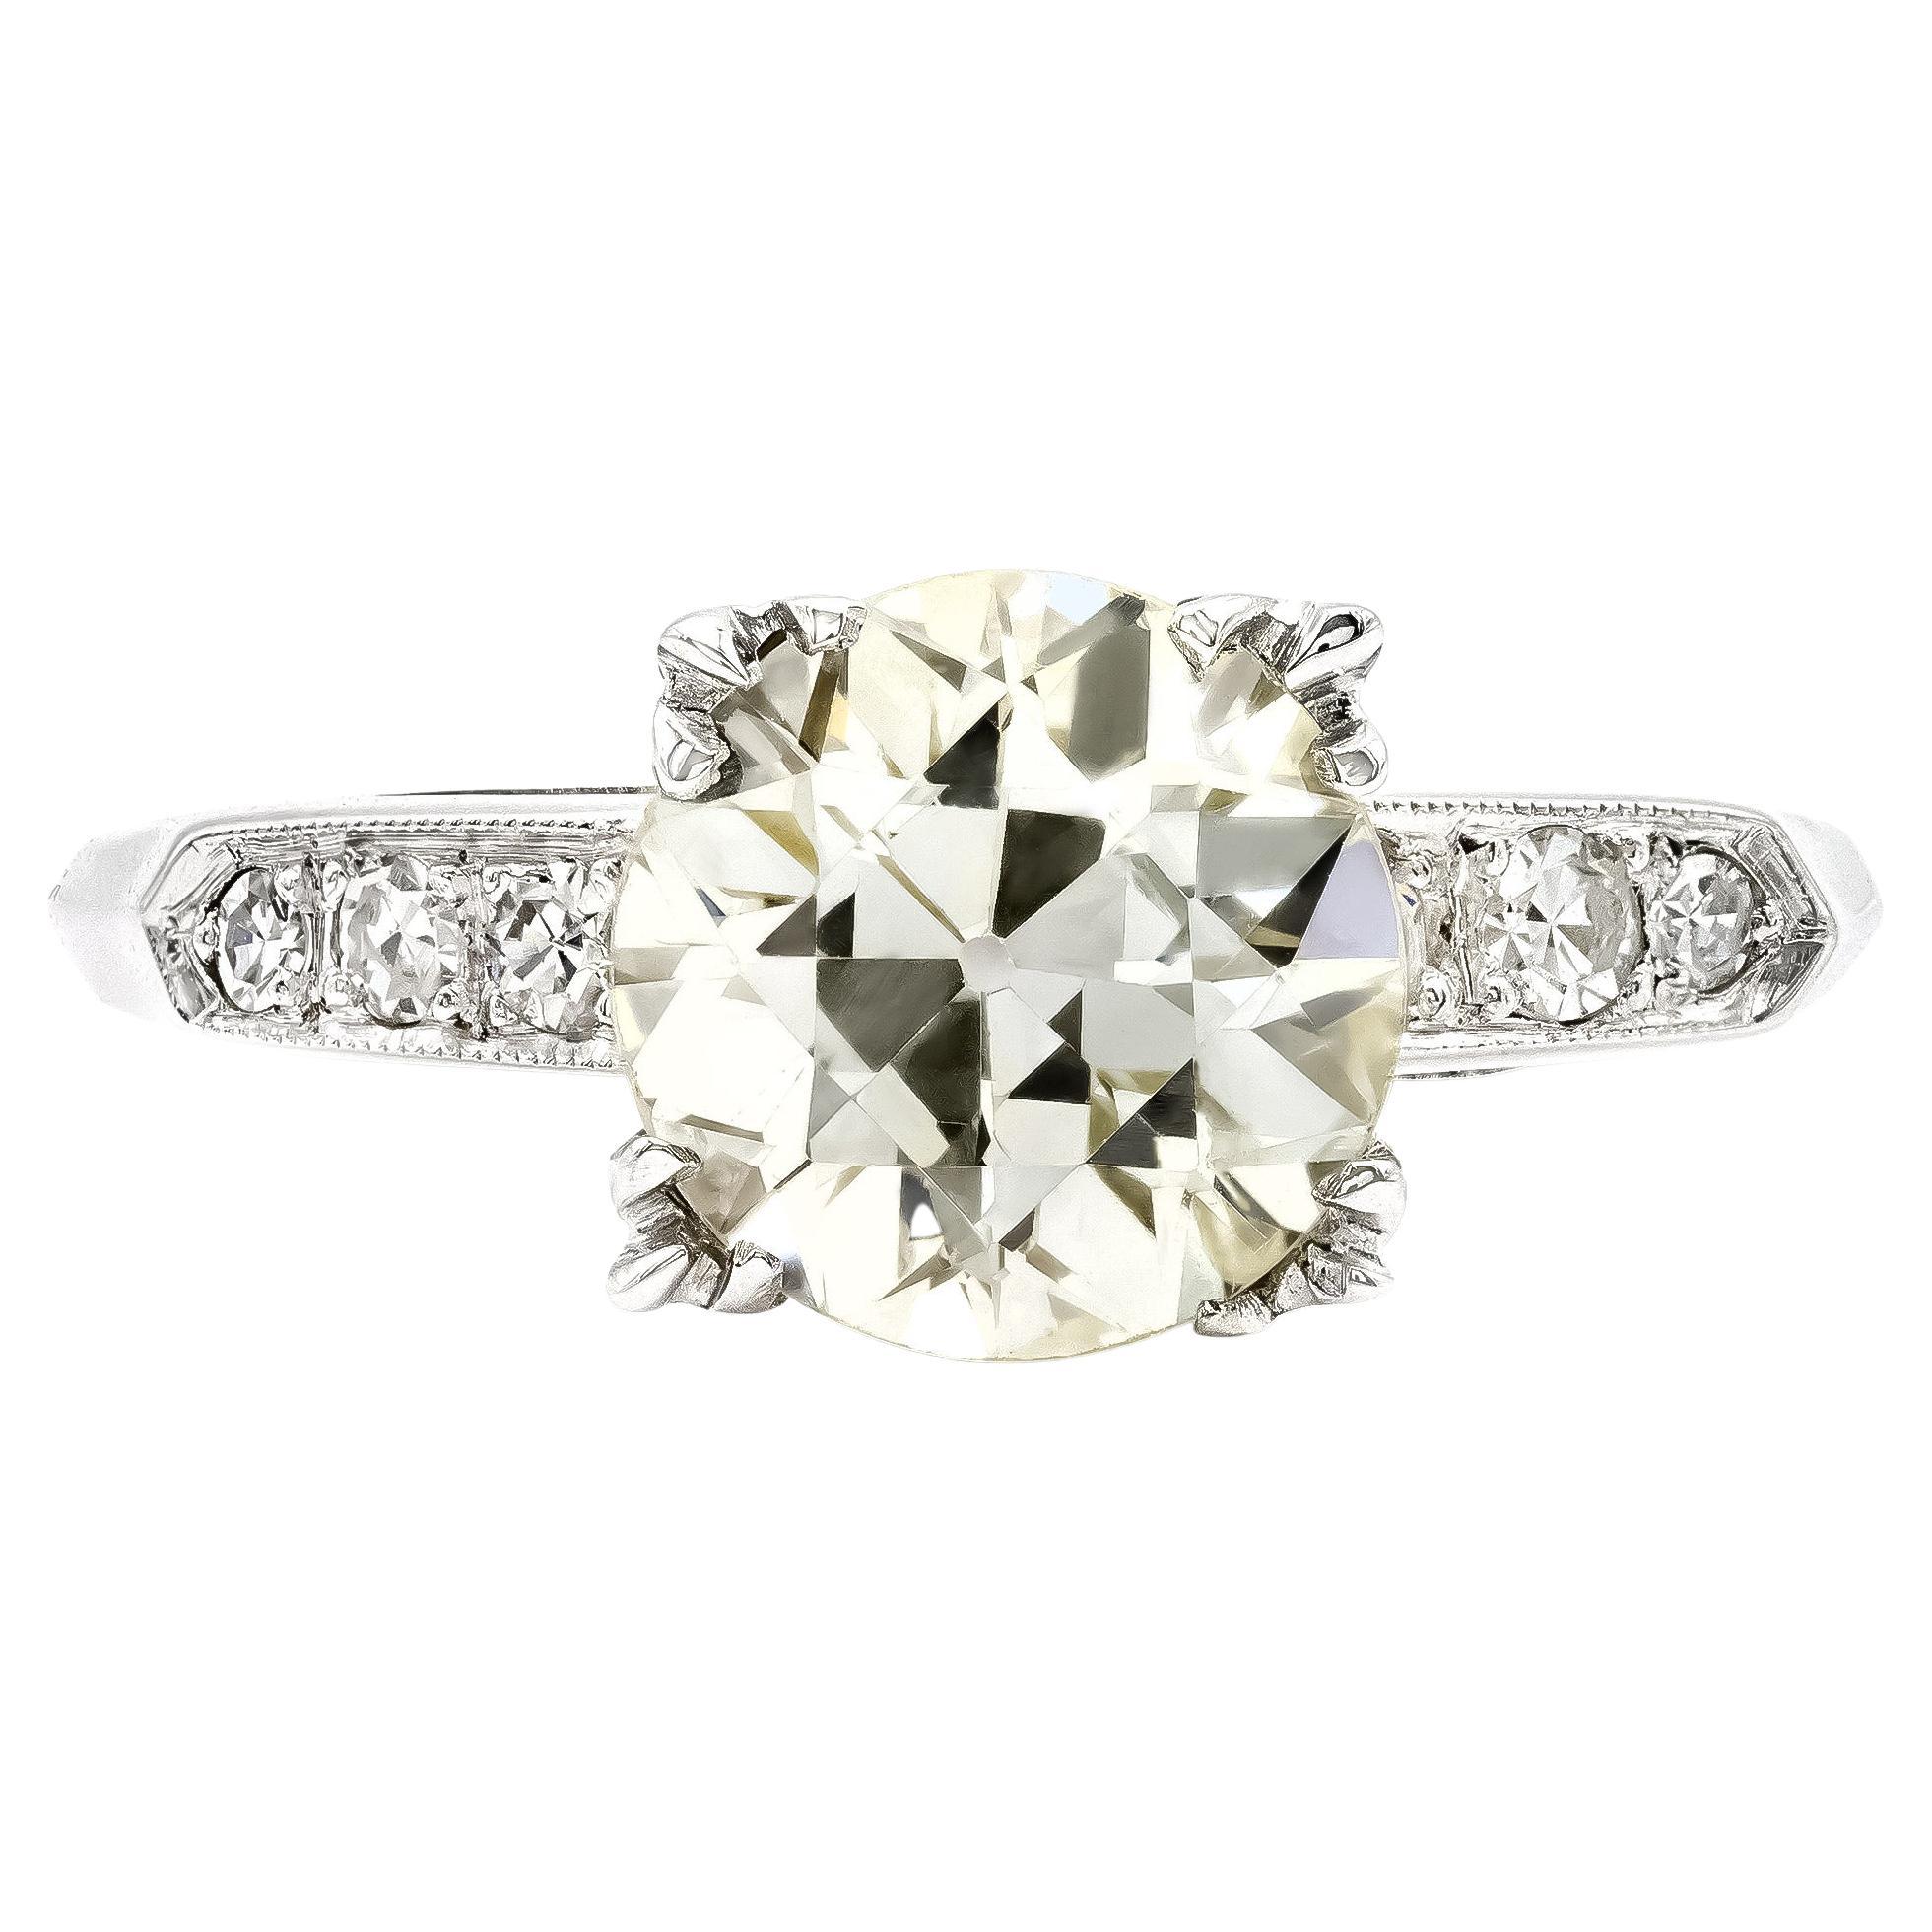 Say hello to this quintessential Deco era engagement ring. The 2 carat European diamond center has all the charm you'll need. Graded Q color you'll pick up on its warmer honey tone. The setting is made complete by diamond accented shoulders and a